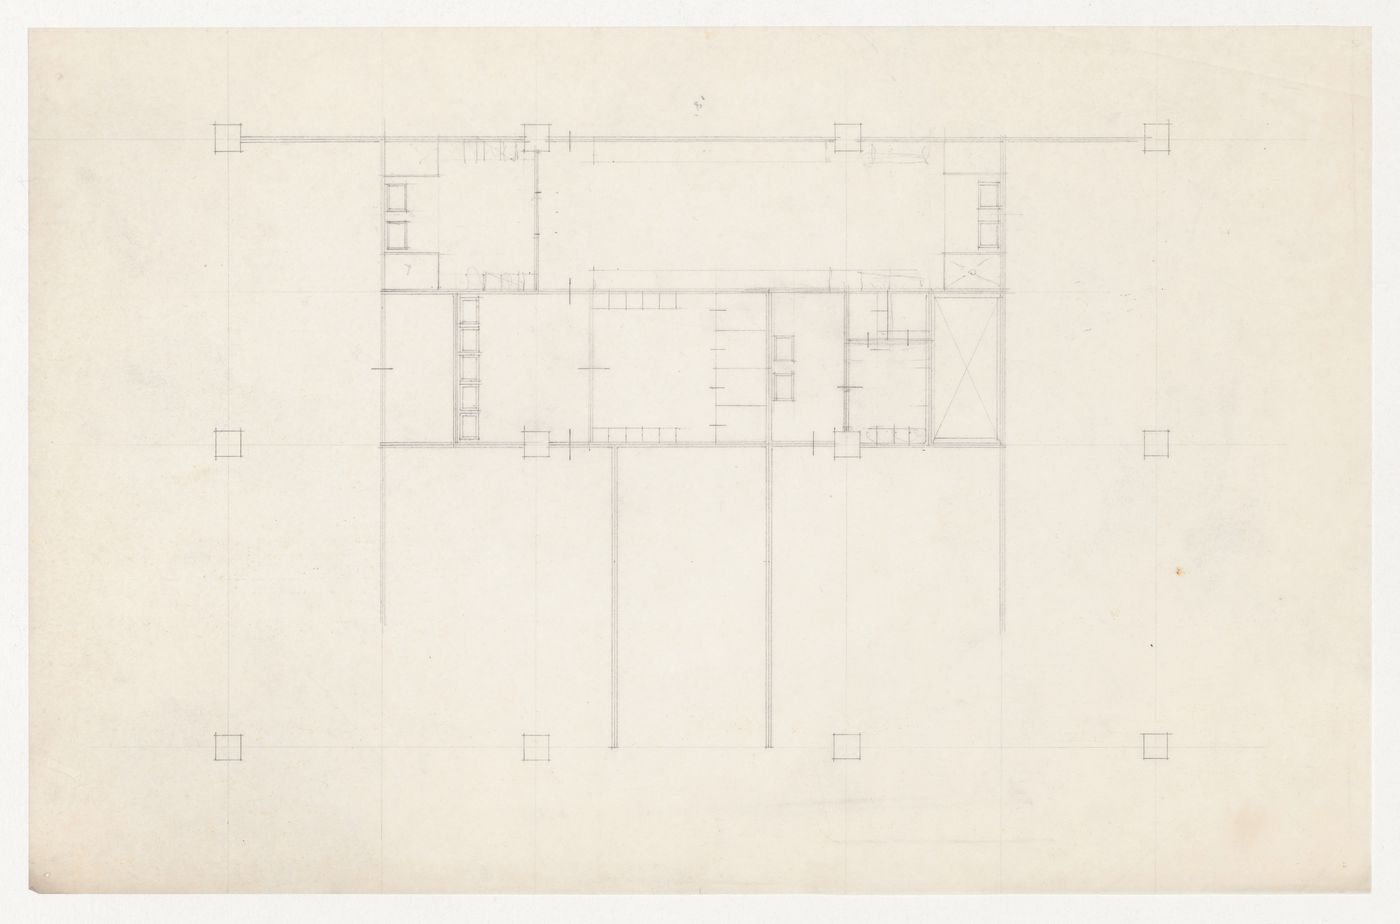 Partial plan, probably for the Metallurgy Building, Illinois Institute of Technology, Chicago